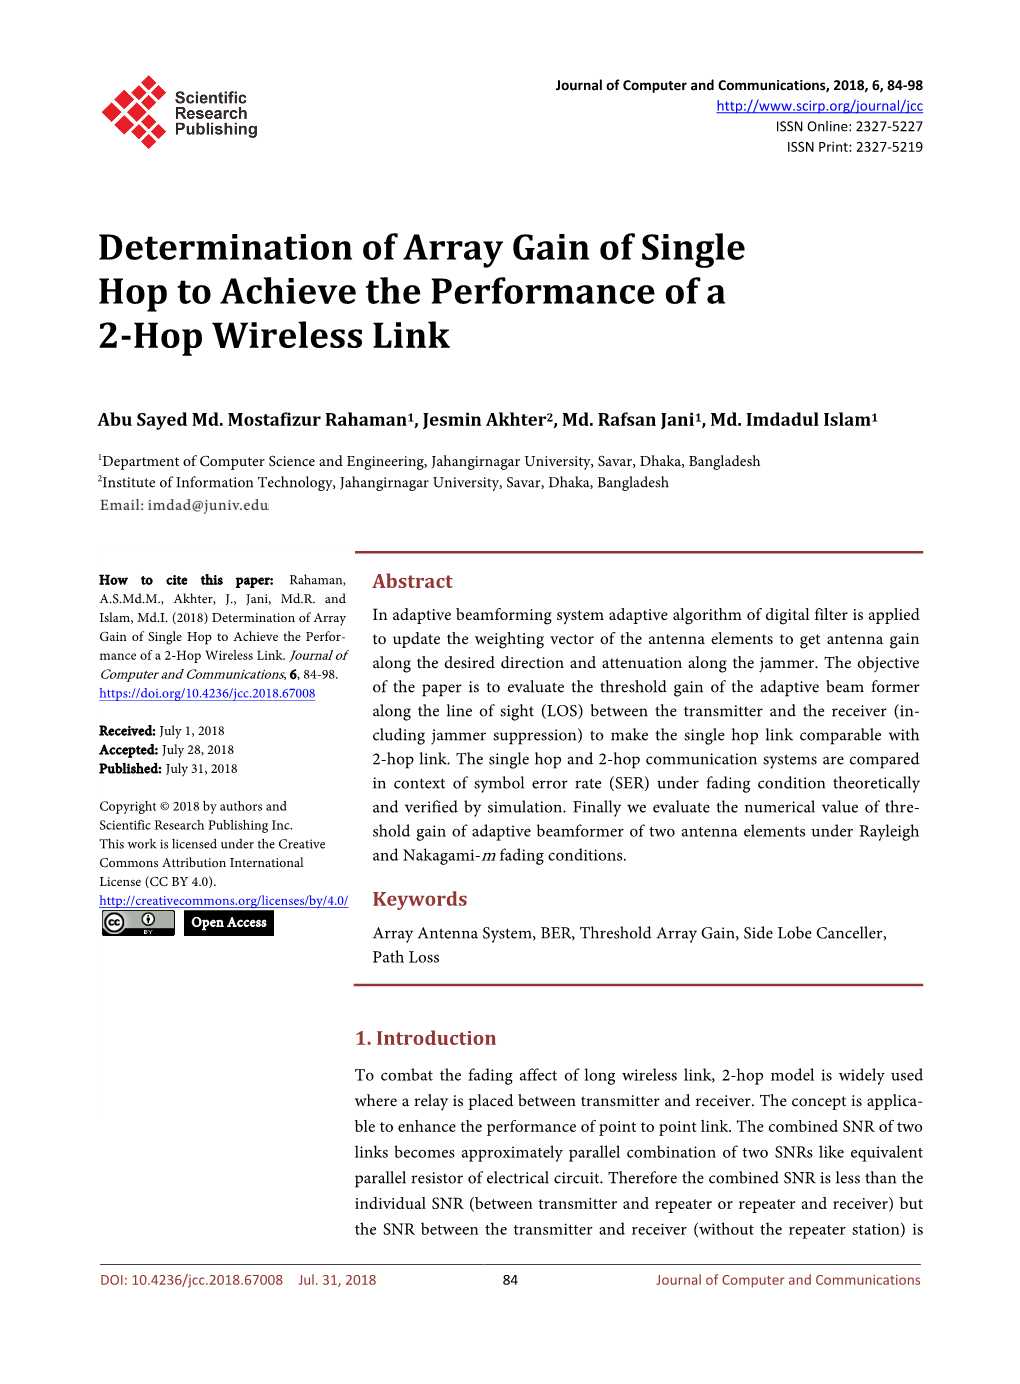 Determination of Array Gain of Single Hop to Achieve the Performance of a 2-Hop Wireless Link